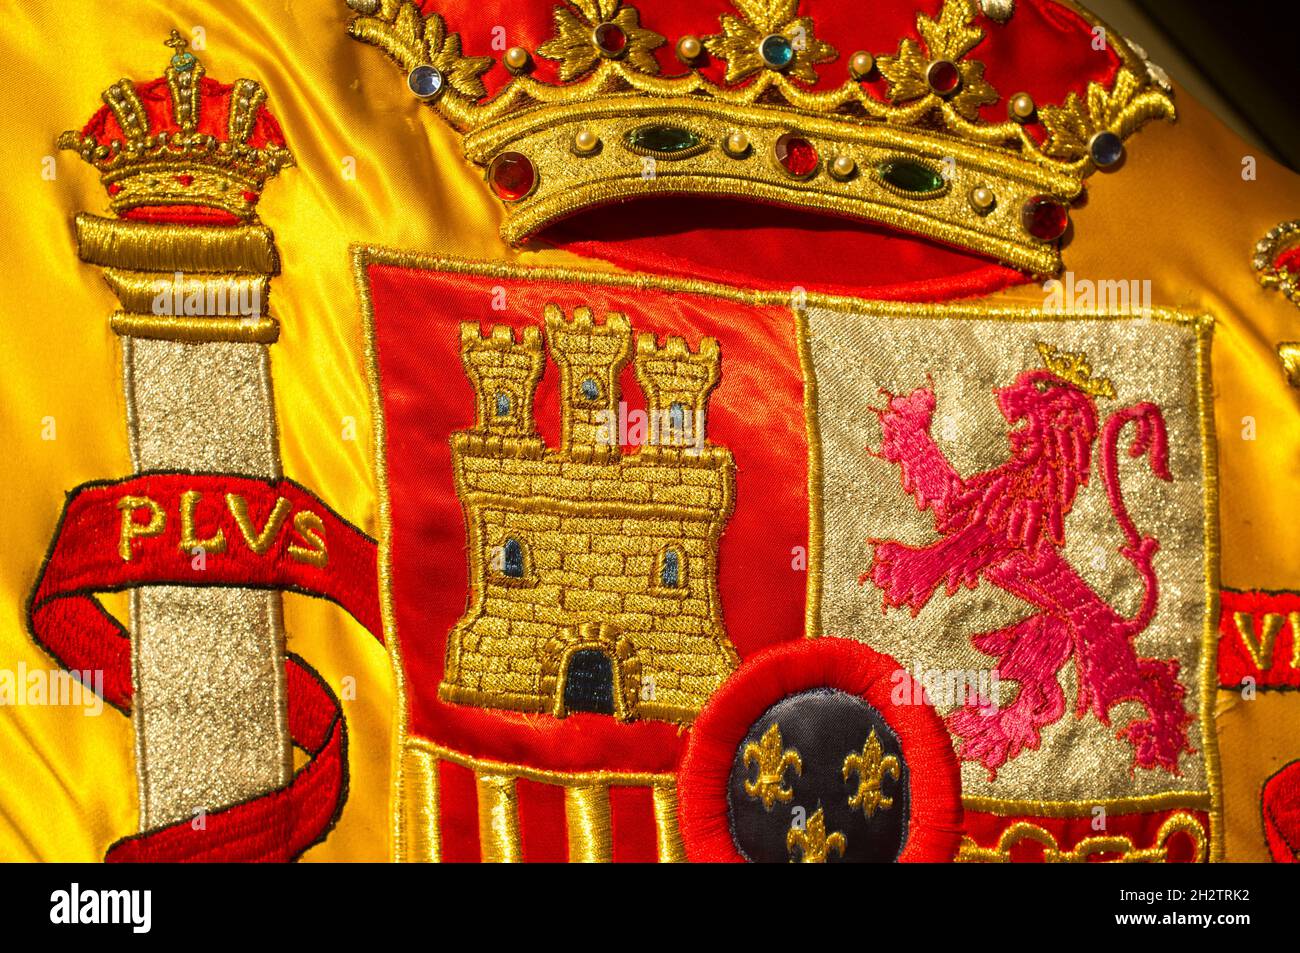 Coat of arms of Spain nation richly embroidered on its flag. Closeup Stock Photo